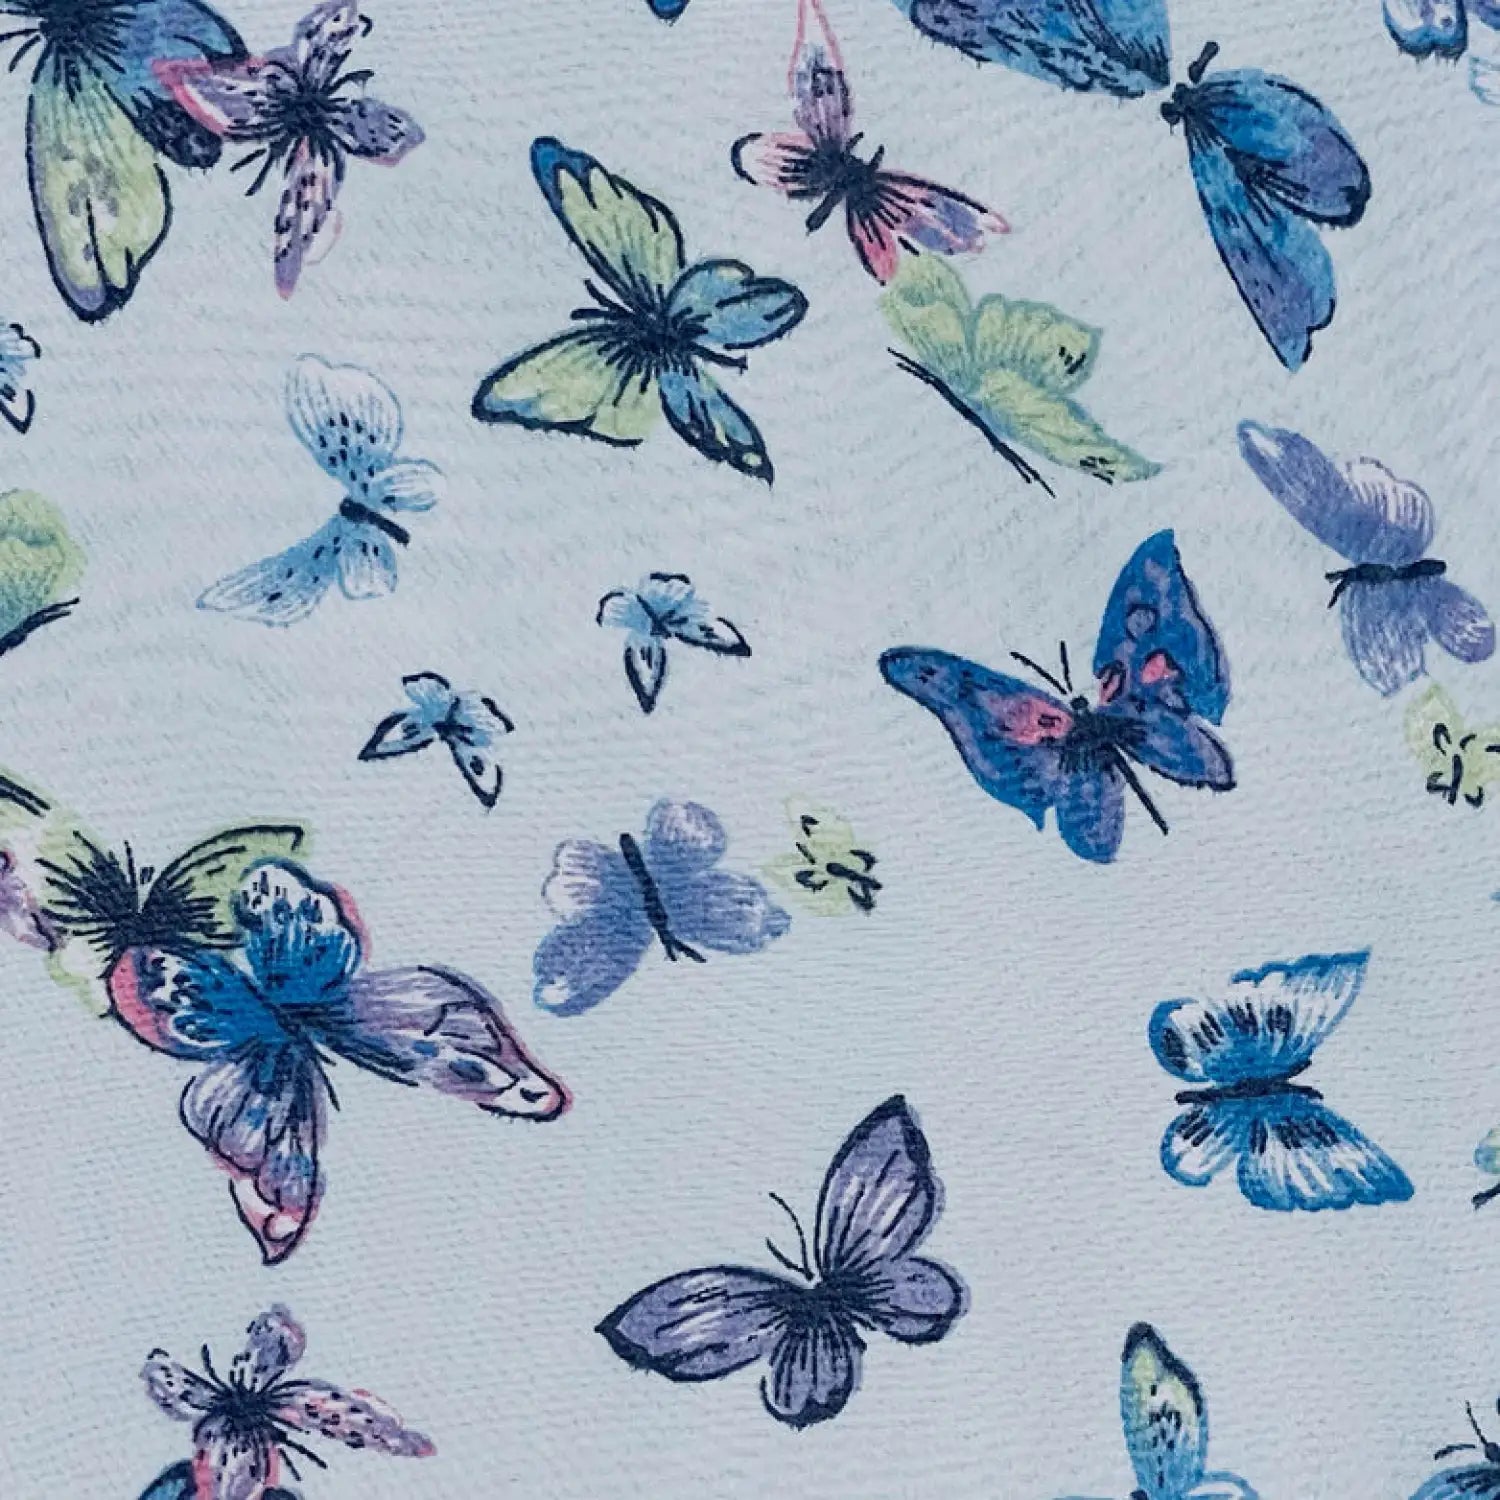 Butterfly Print Scarf: white background with blue and purple butterflies